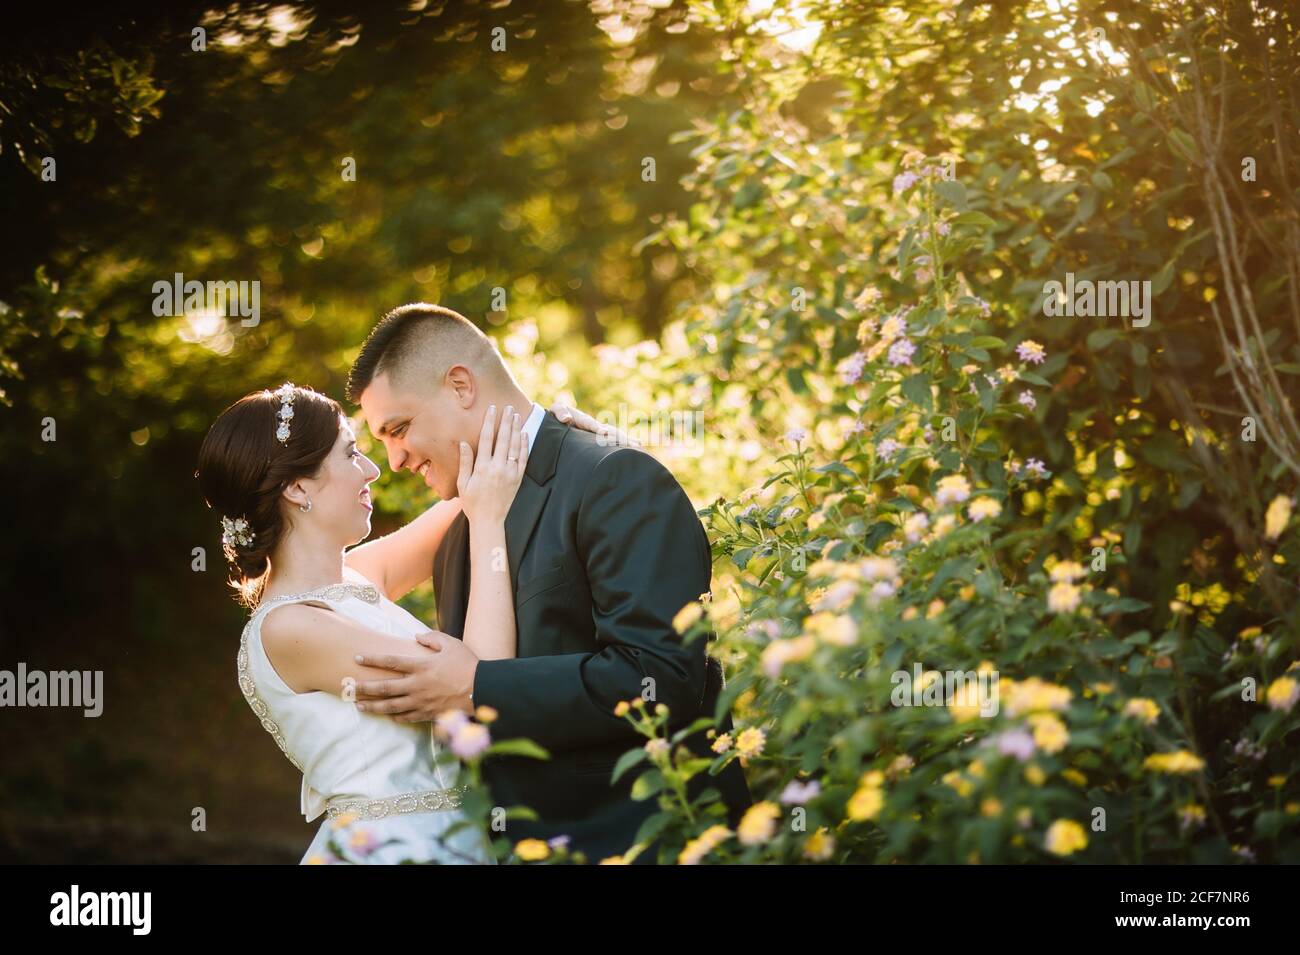 Side view of graceful tender wedding couple bonding and looking to eyes with love among bright yellow flowers and bushes in garden Stock Photo